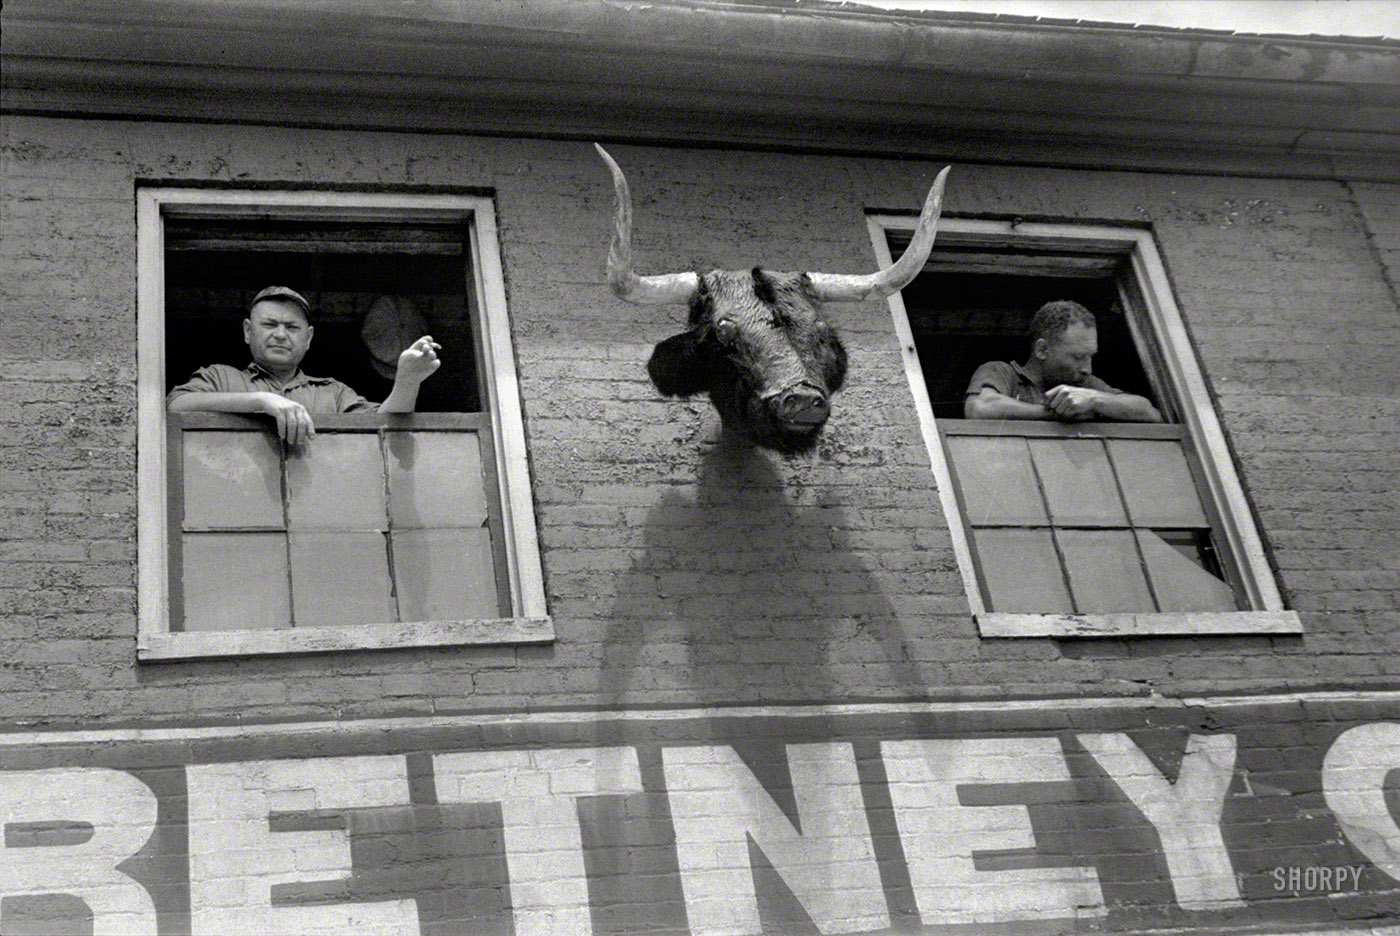 Summer 1938. "Tannery workers in Springfield, Ohio." 35mm nitrate negative by Ben Shahn for the Farm Security Administration. View full size.